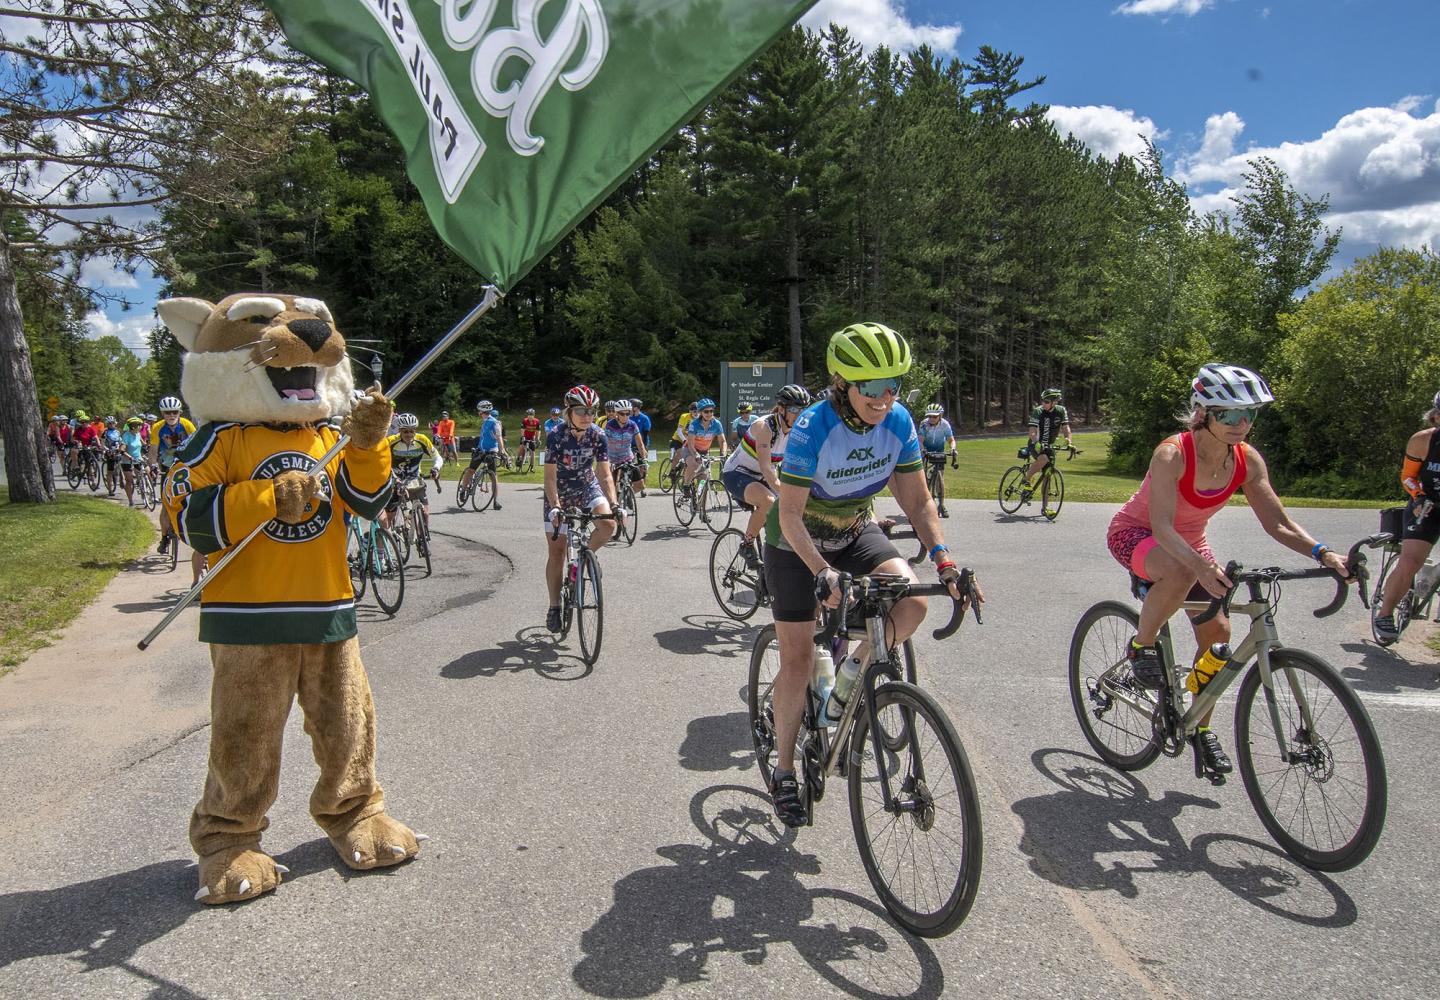 Bike Adirondacks signature events are like no other. These fully supported tours allow you to truly connect with the Adirondack landscape and its communitie.